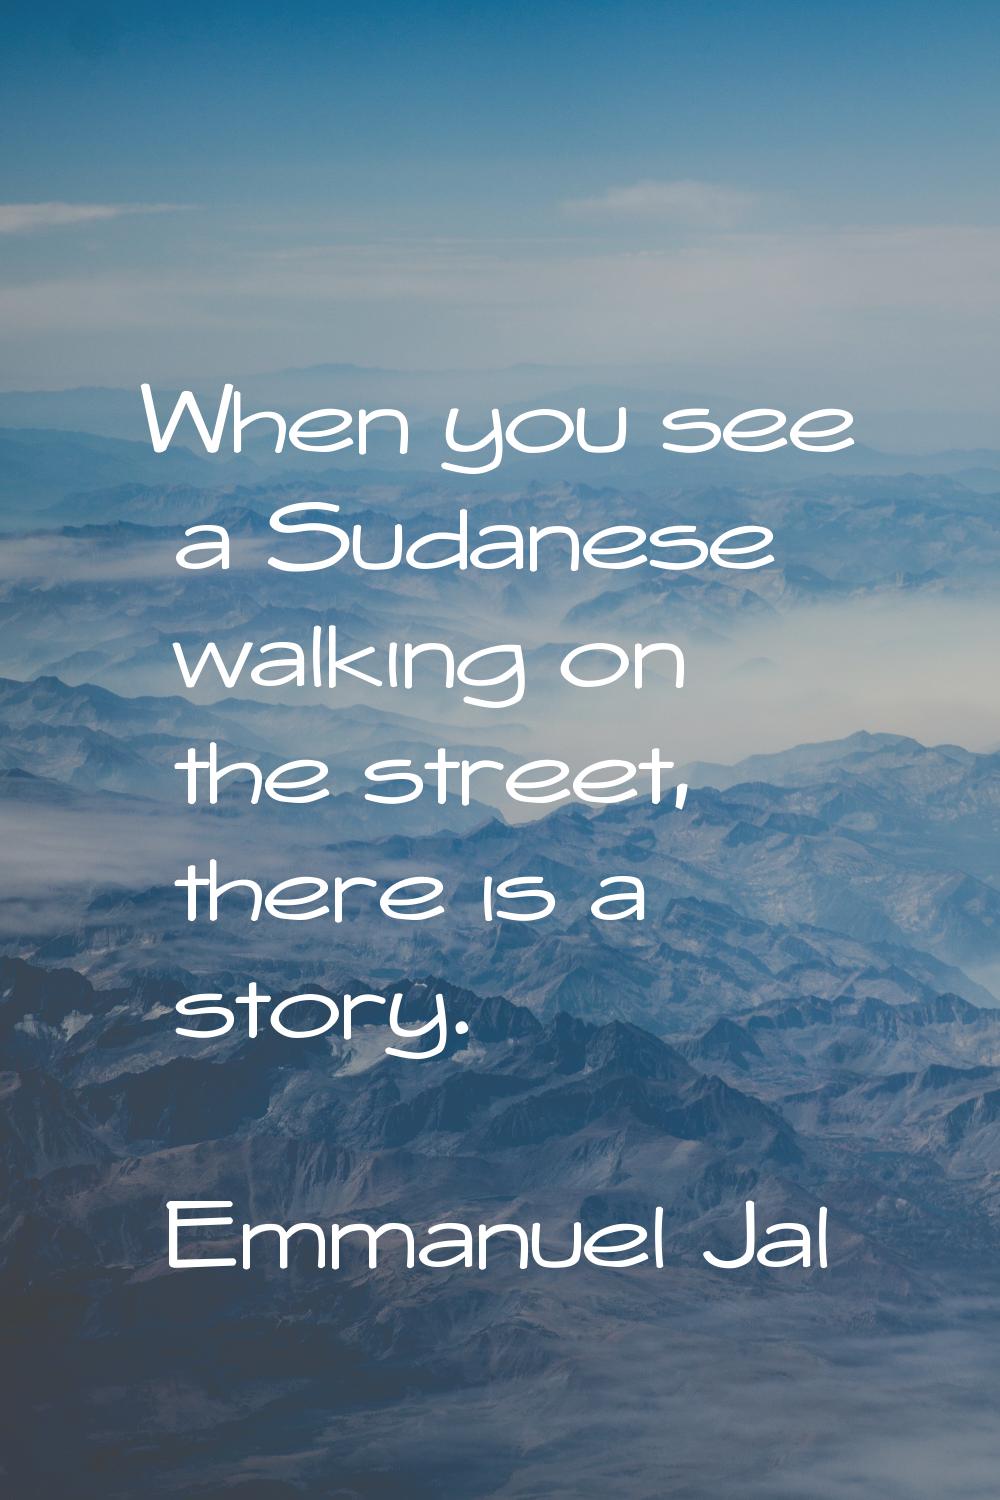 When you see a Sudanese walking on the street, there is a story.